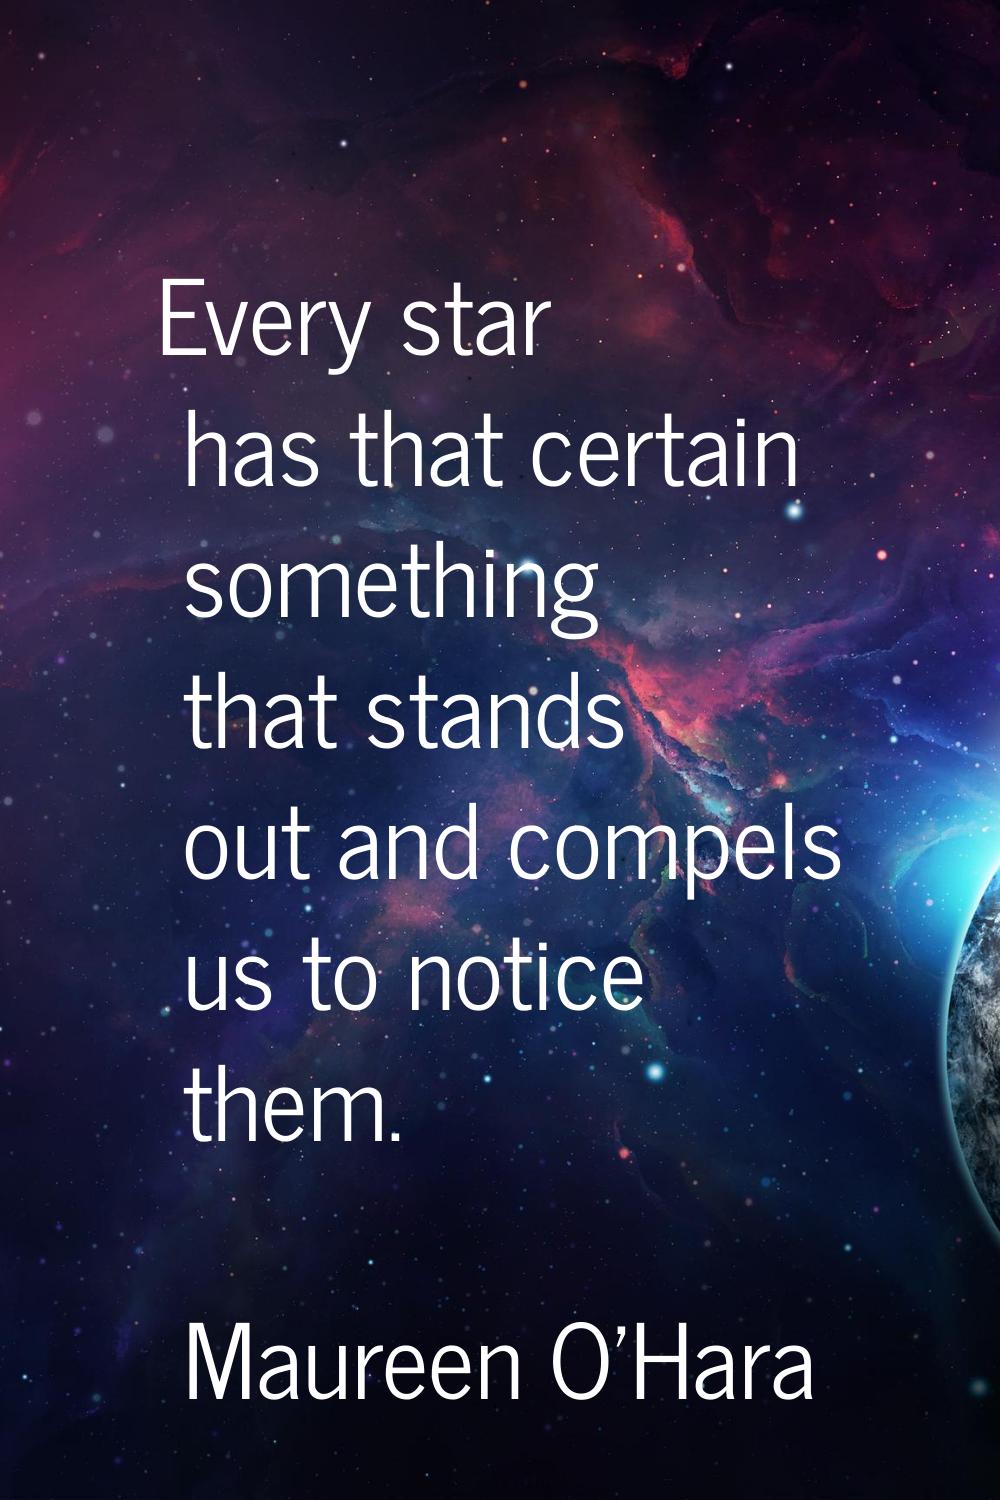 Every star has that certain something that stands out and compels us to notice them.